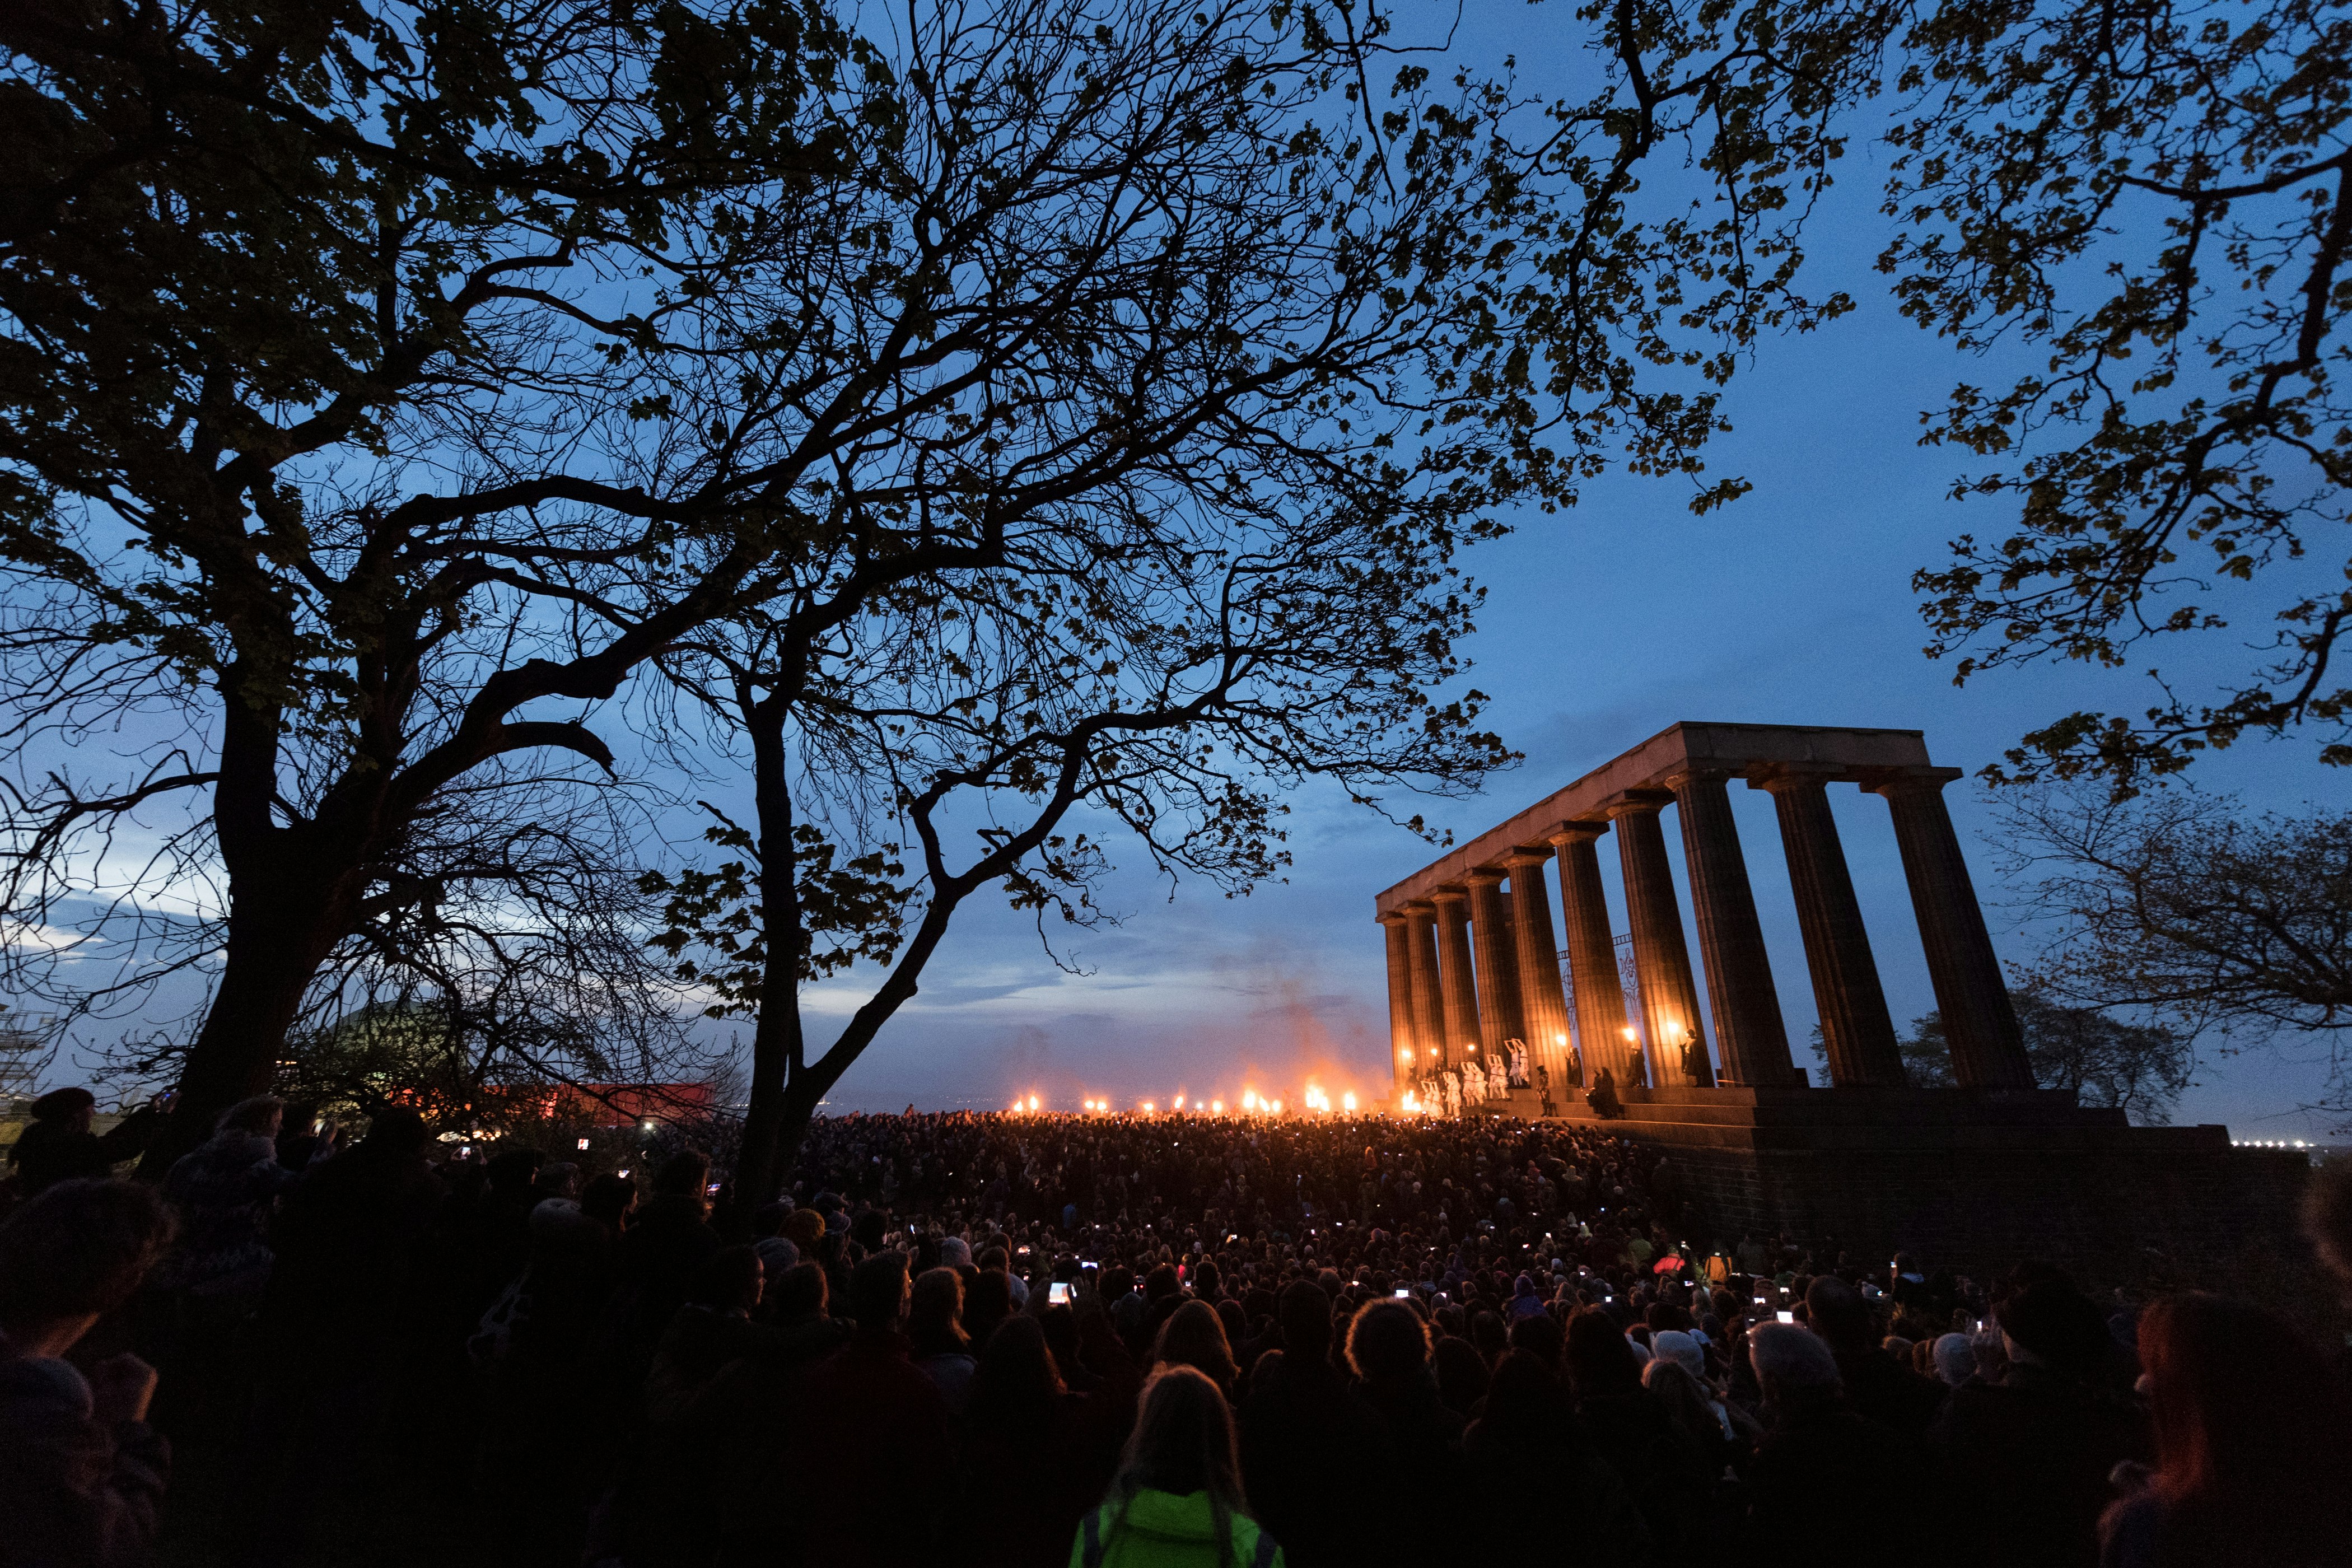 The partially completed columns of the Parthenon replica on Carlton Hill is lit by bonfires and torches that are faintly illuminating a vast crowd, some holding glowing cellphone screens against the light blue dusk